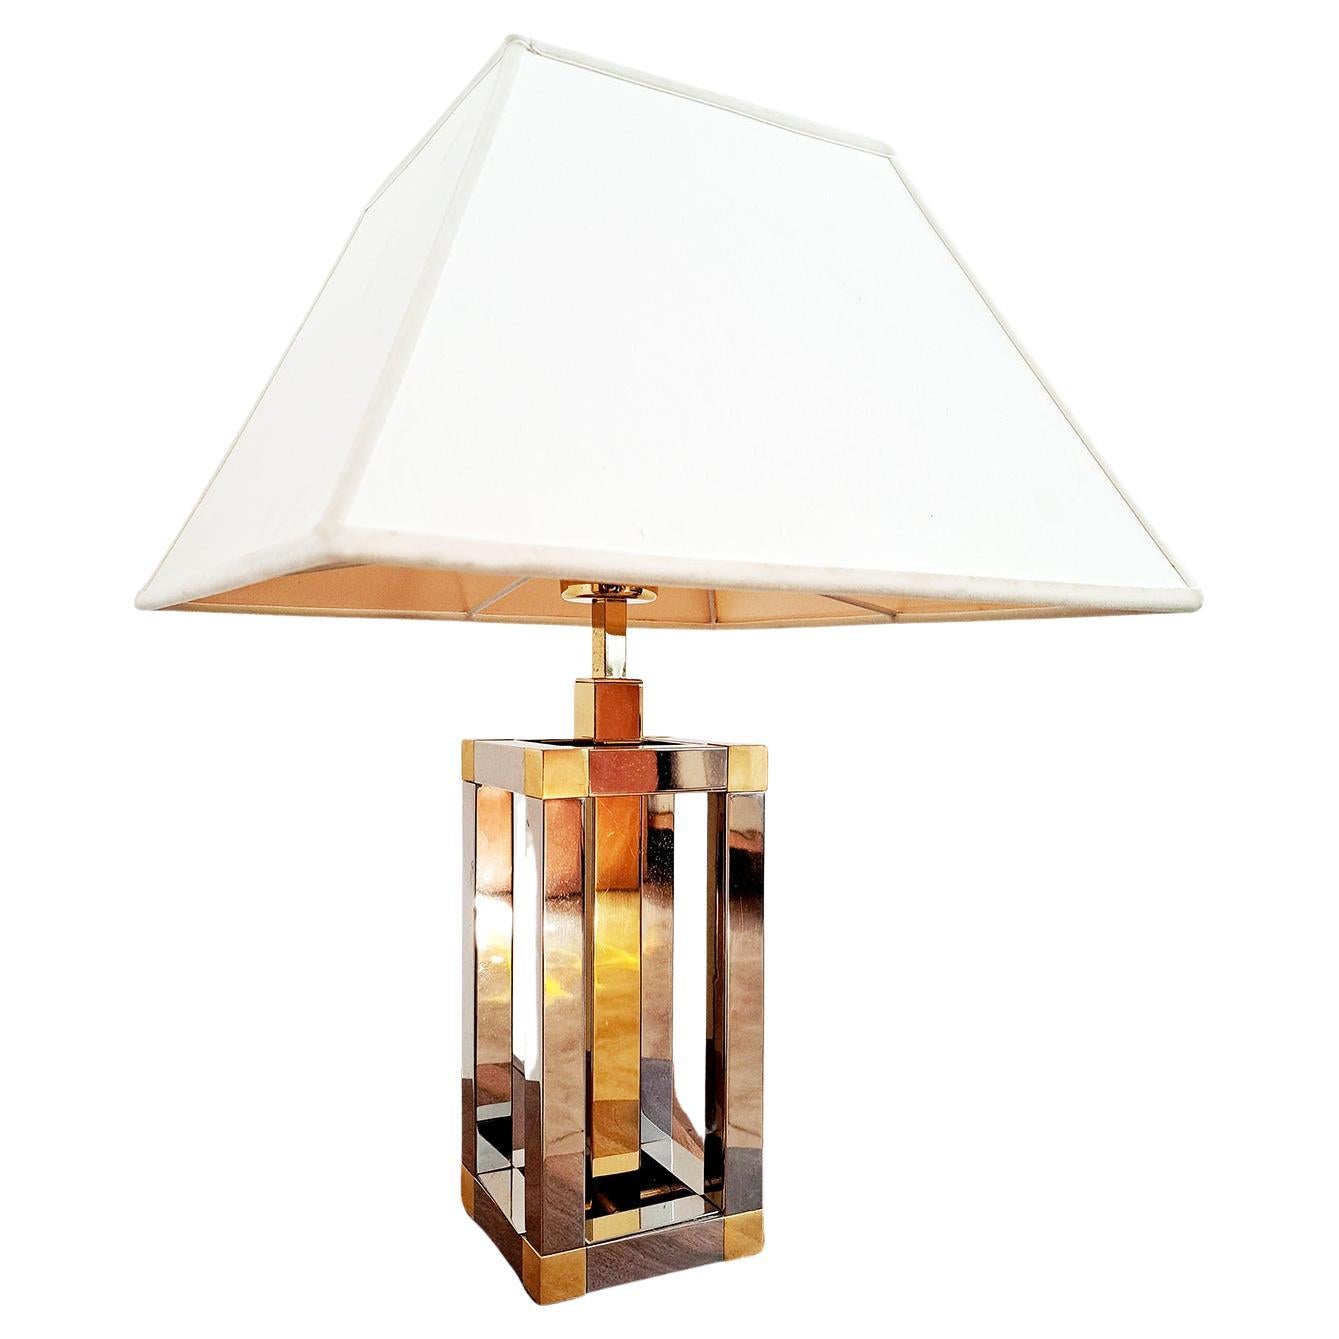 Lampe de table Willy Rizzo, Italie, années 1970